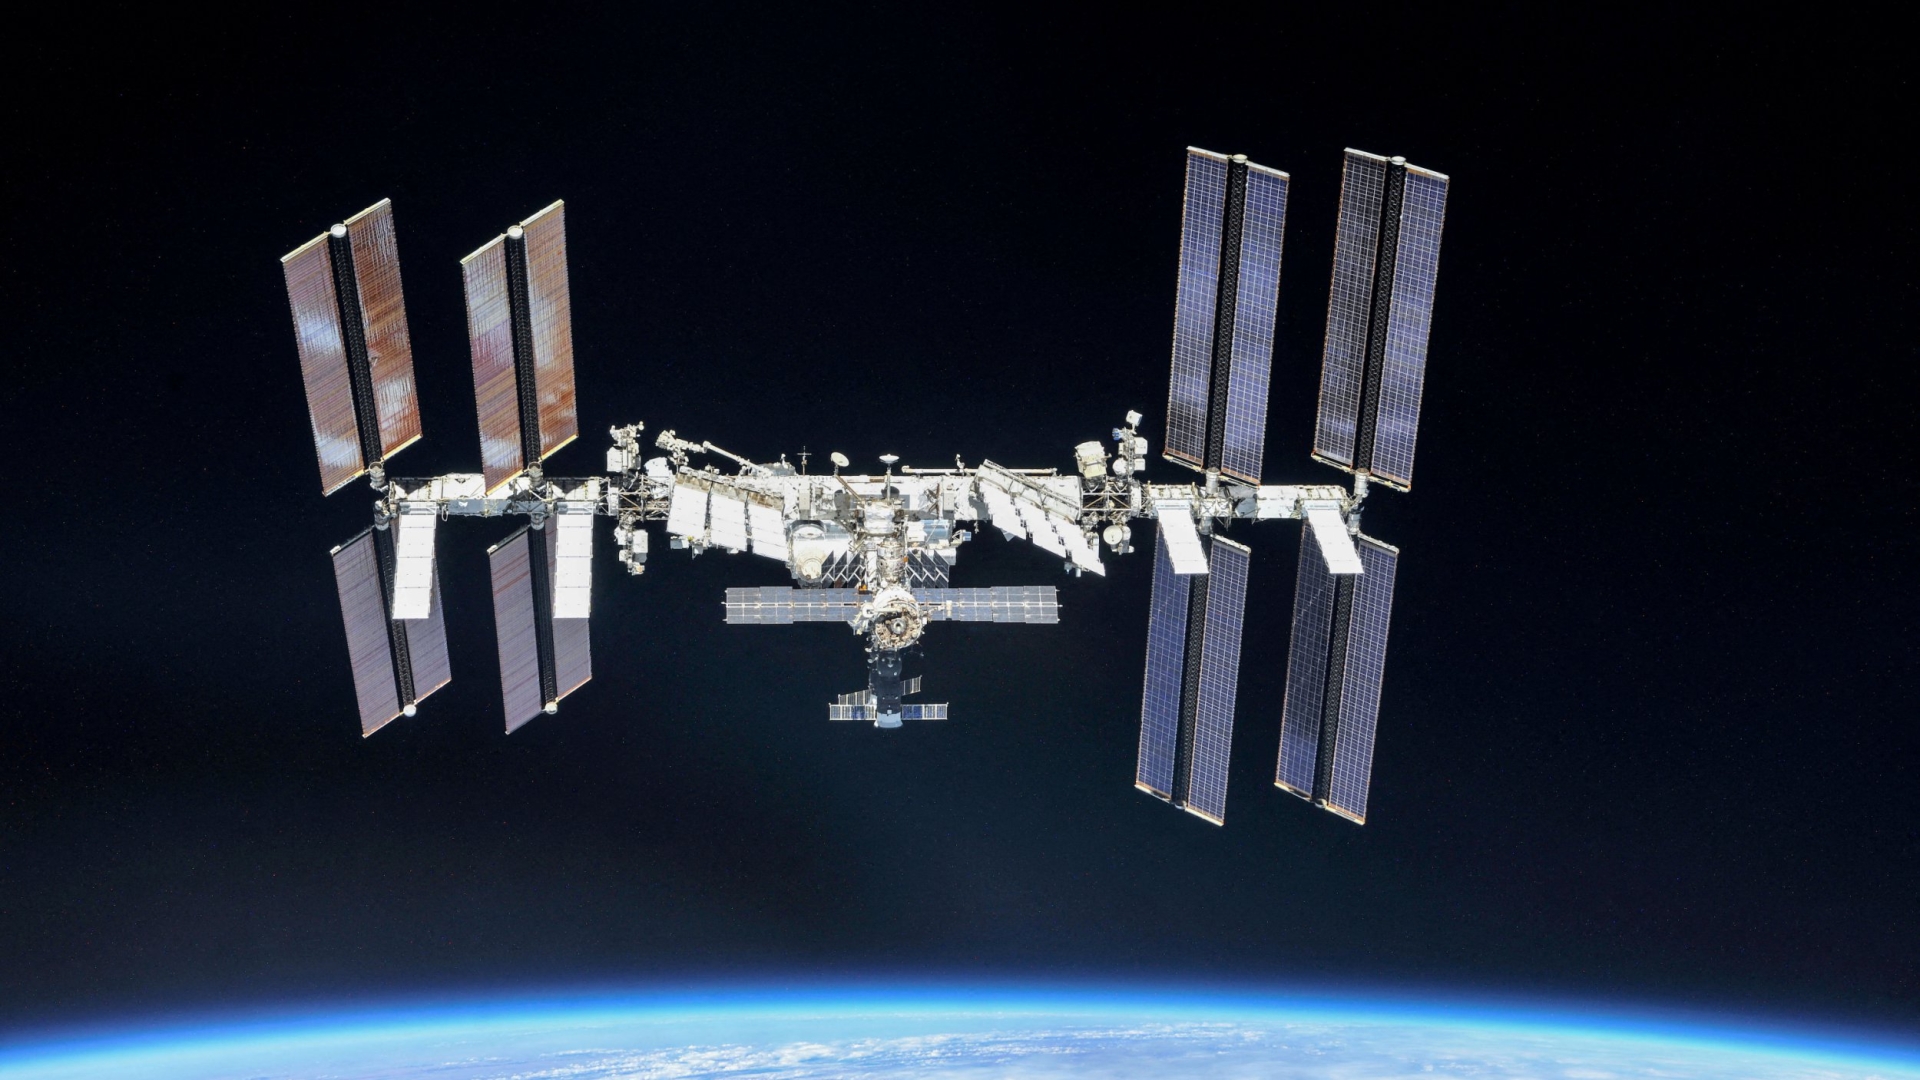 Russian cosmonaut and European astronaut hang outside ISS in gravity-defying footage